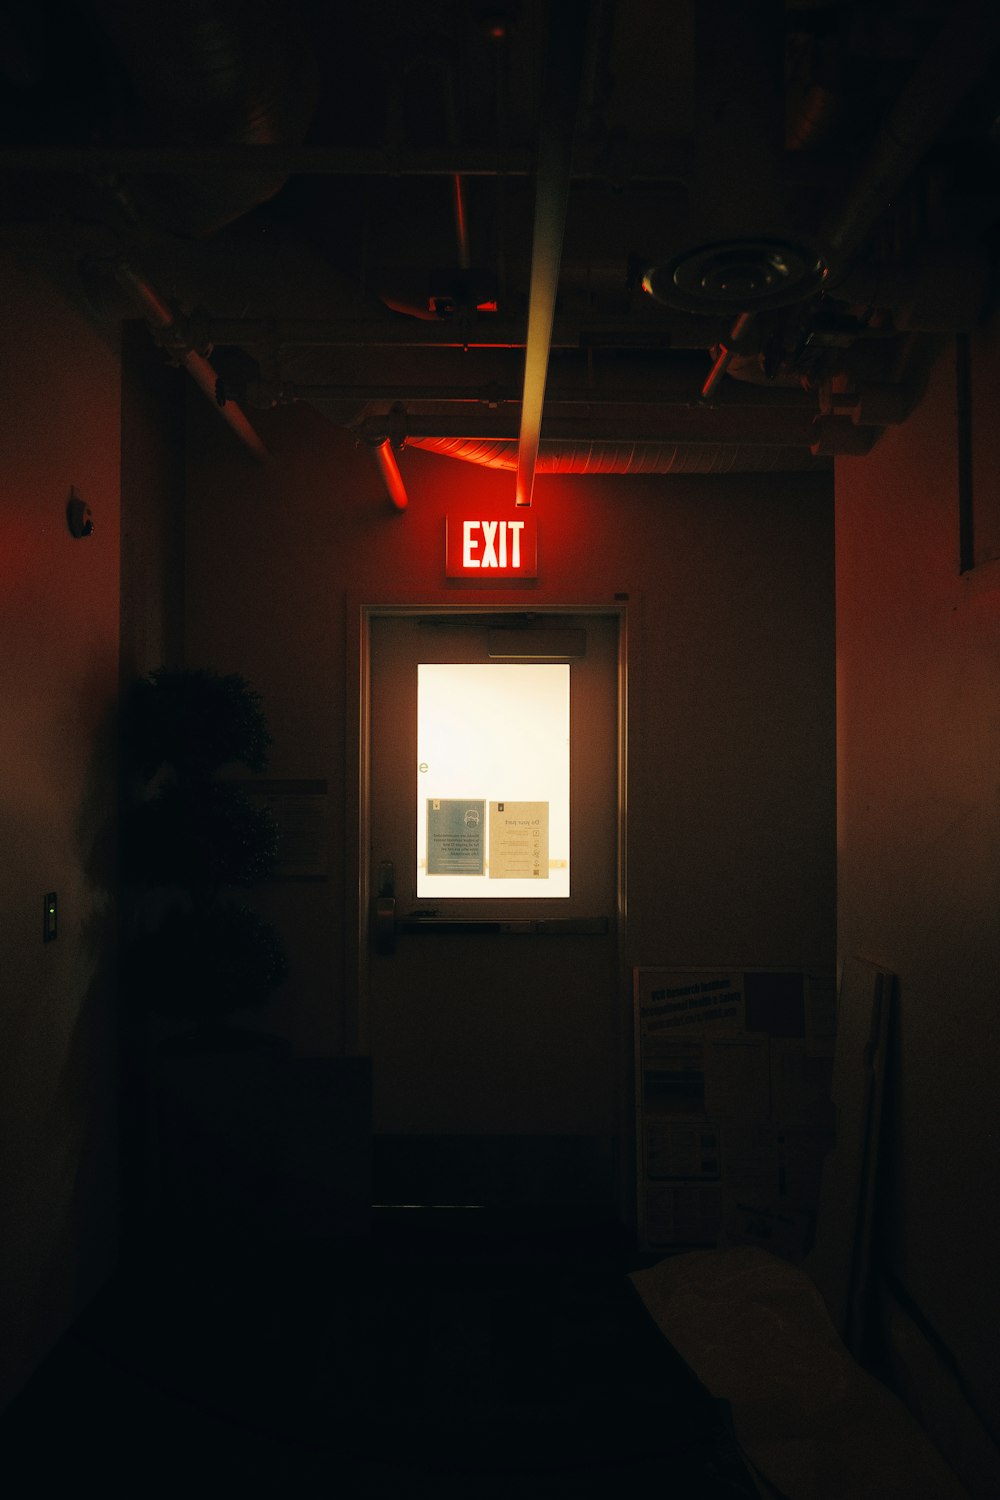 the exit sign is lit up in the dark